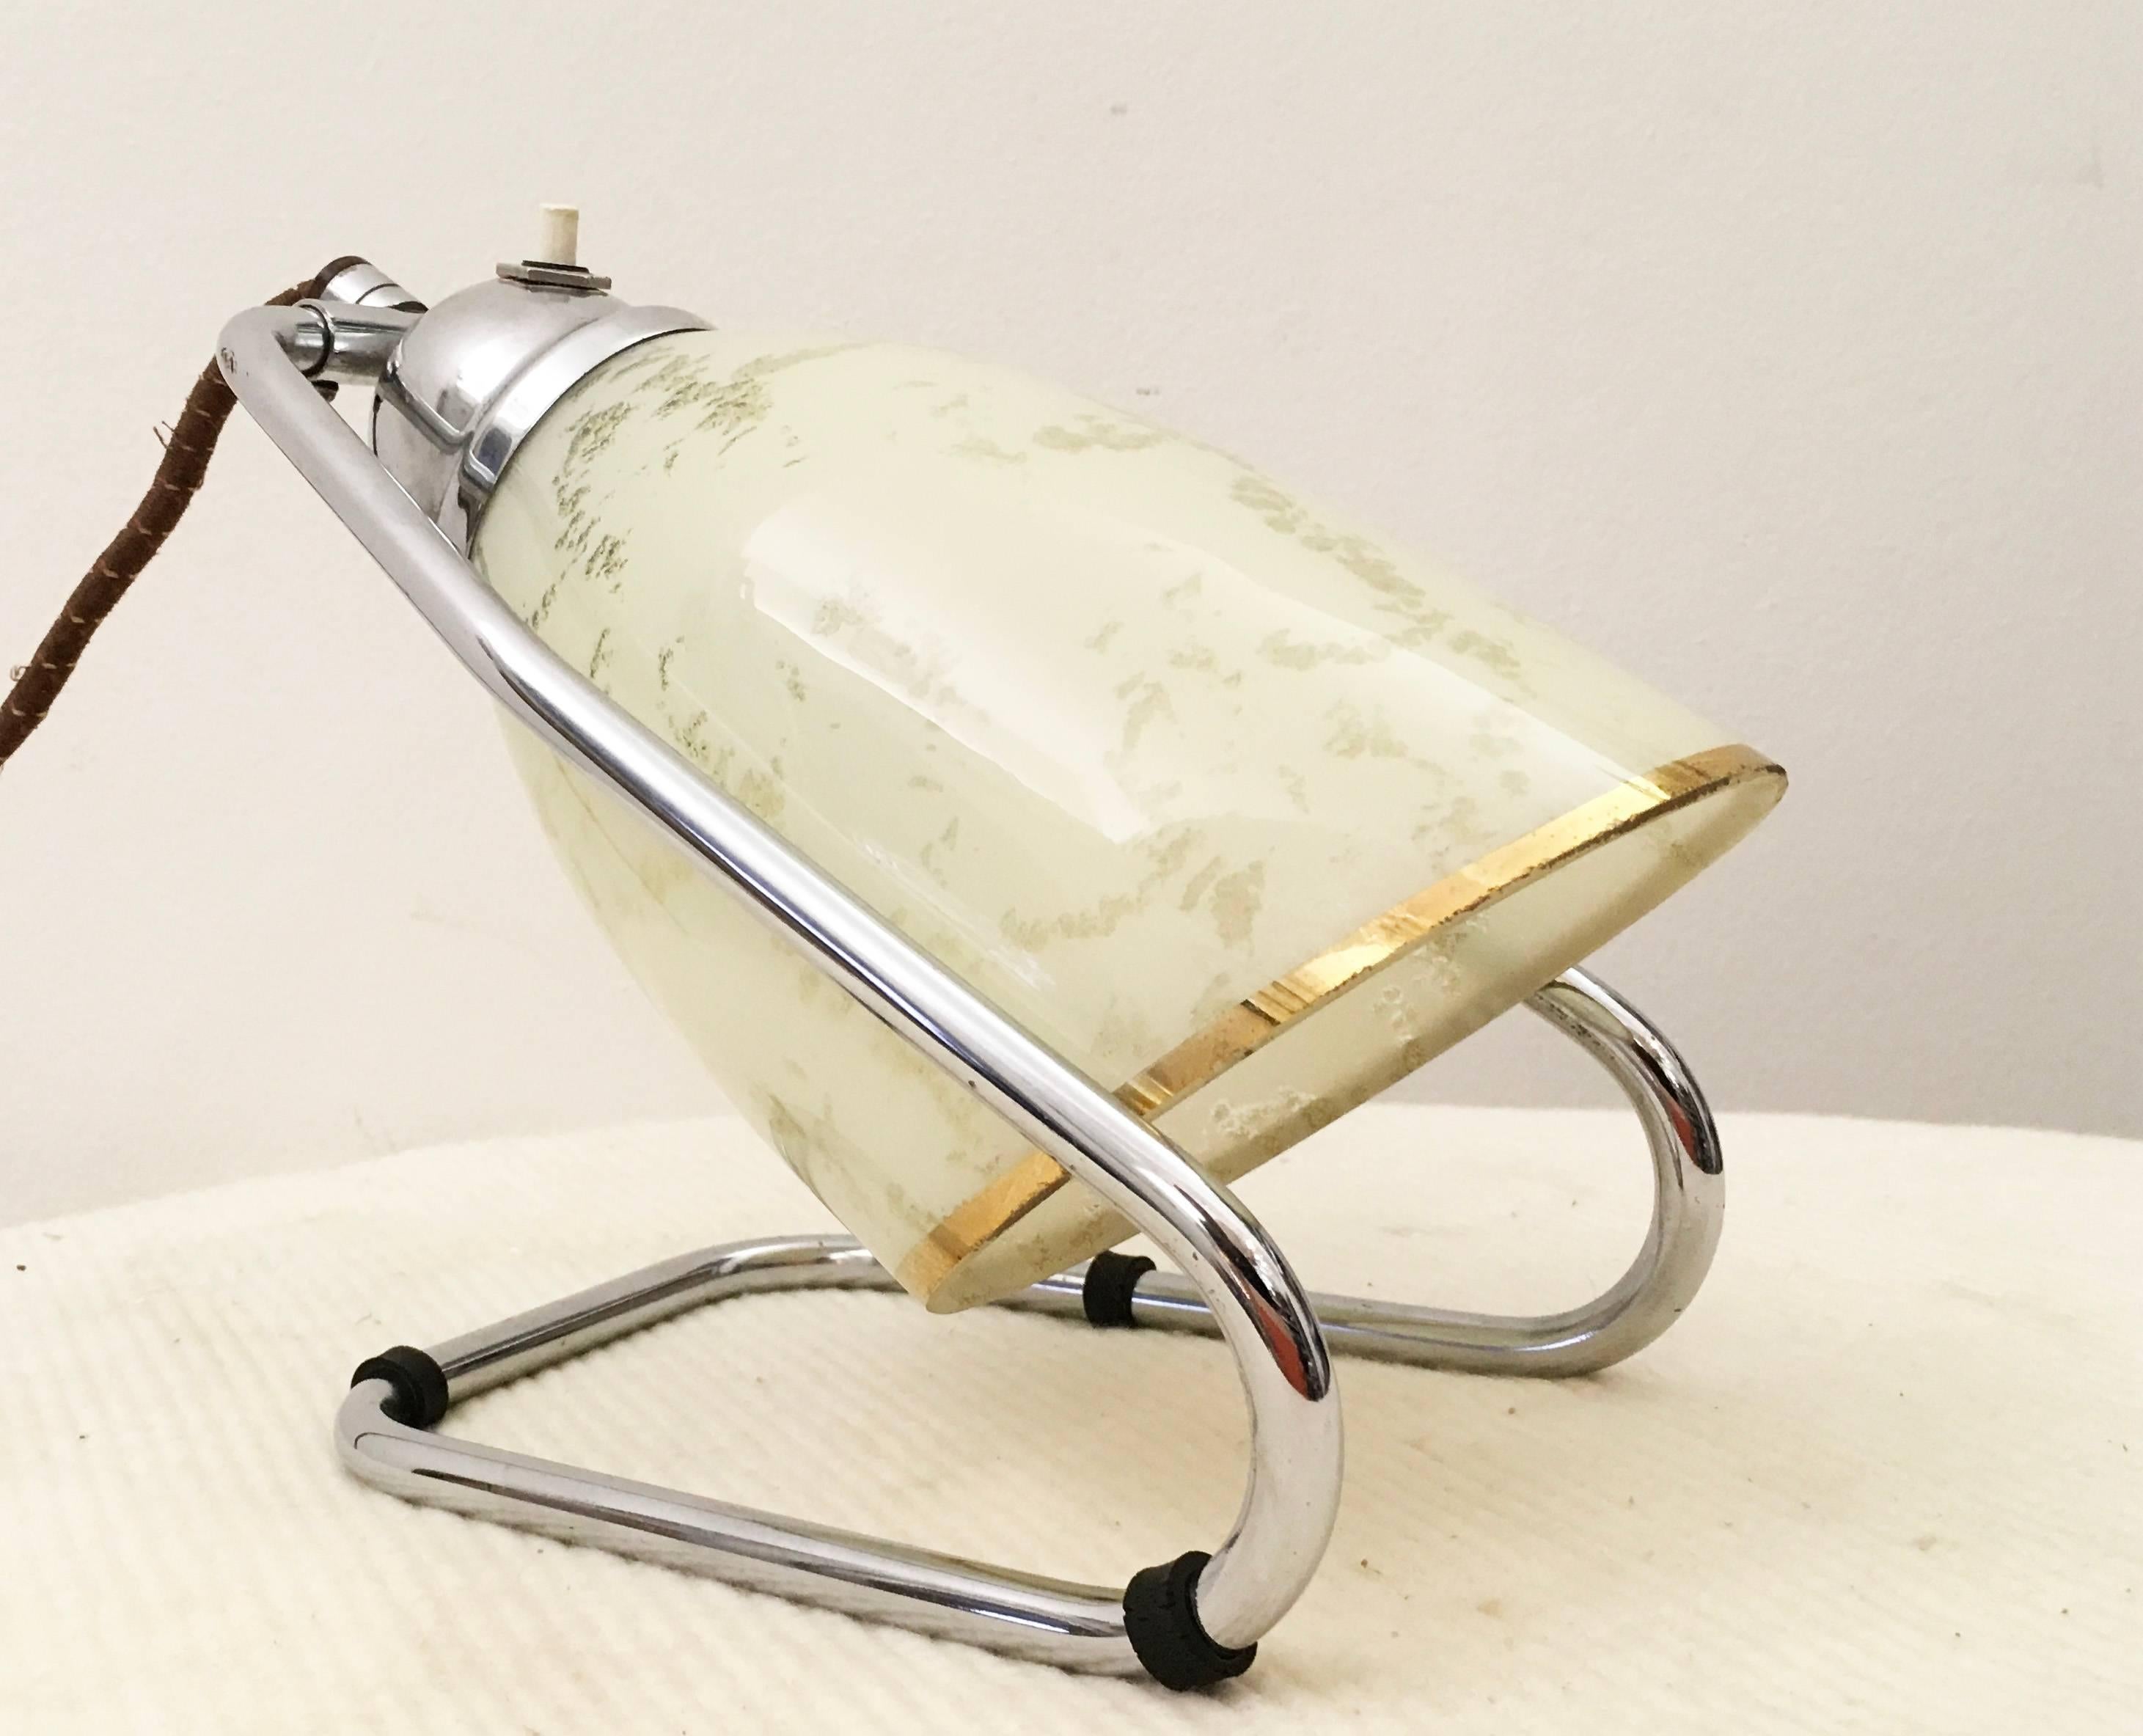 Steel chromed with a glass shade, fitted with one E27 socket.
Made in the 1930s in Czech Republic.